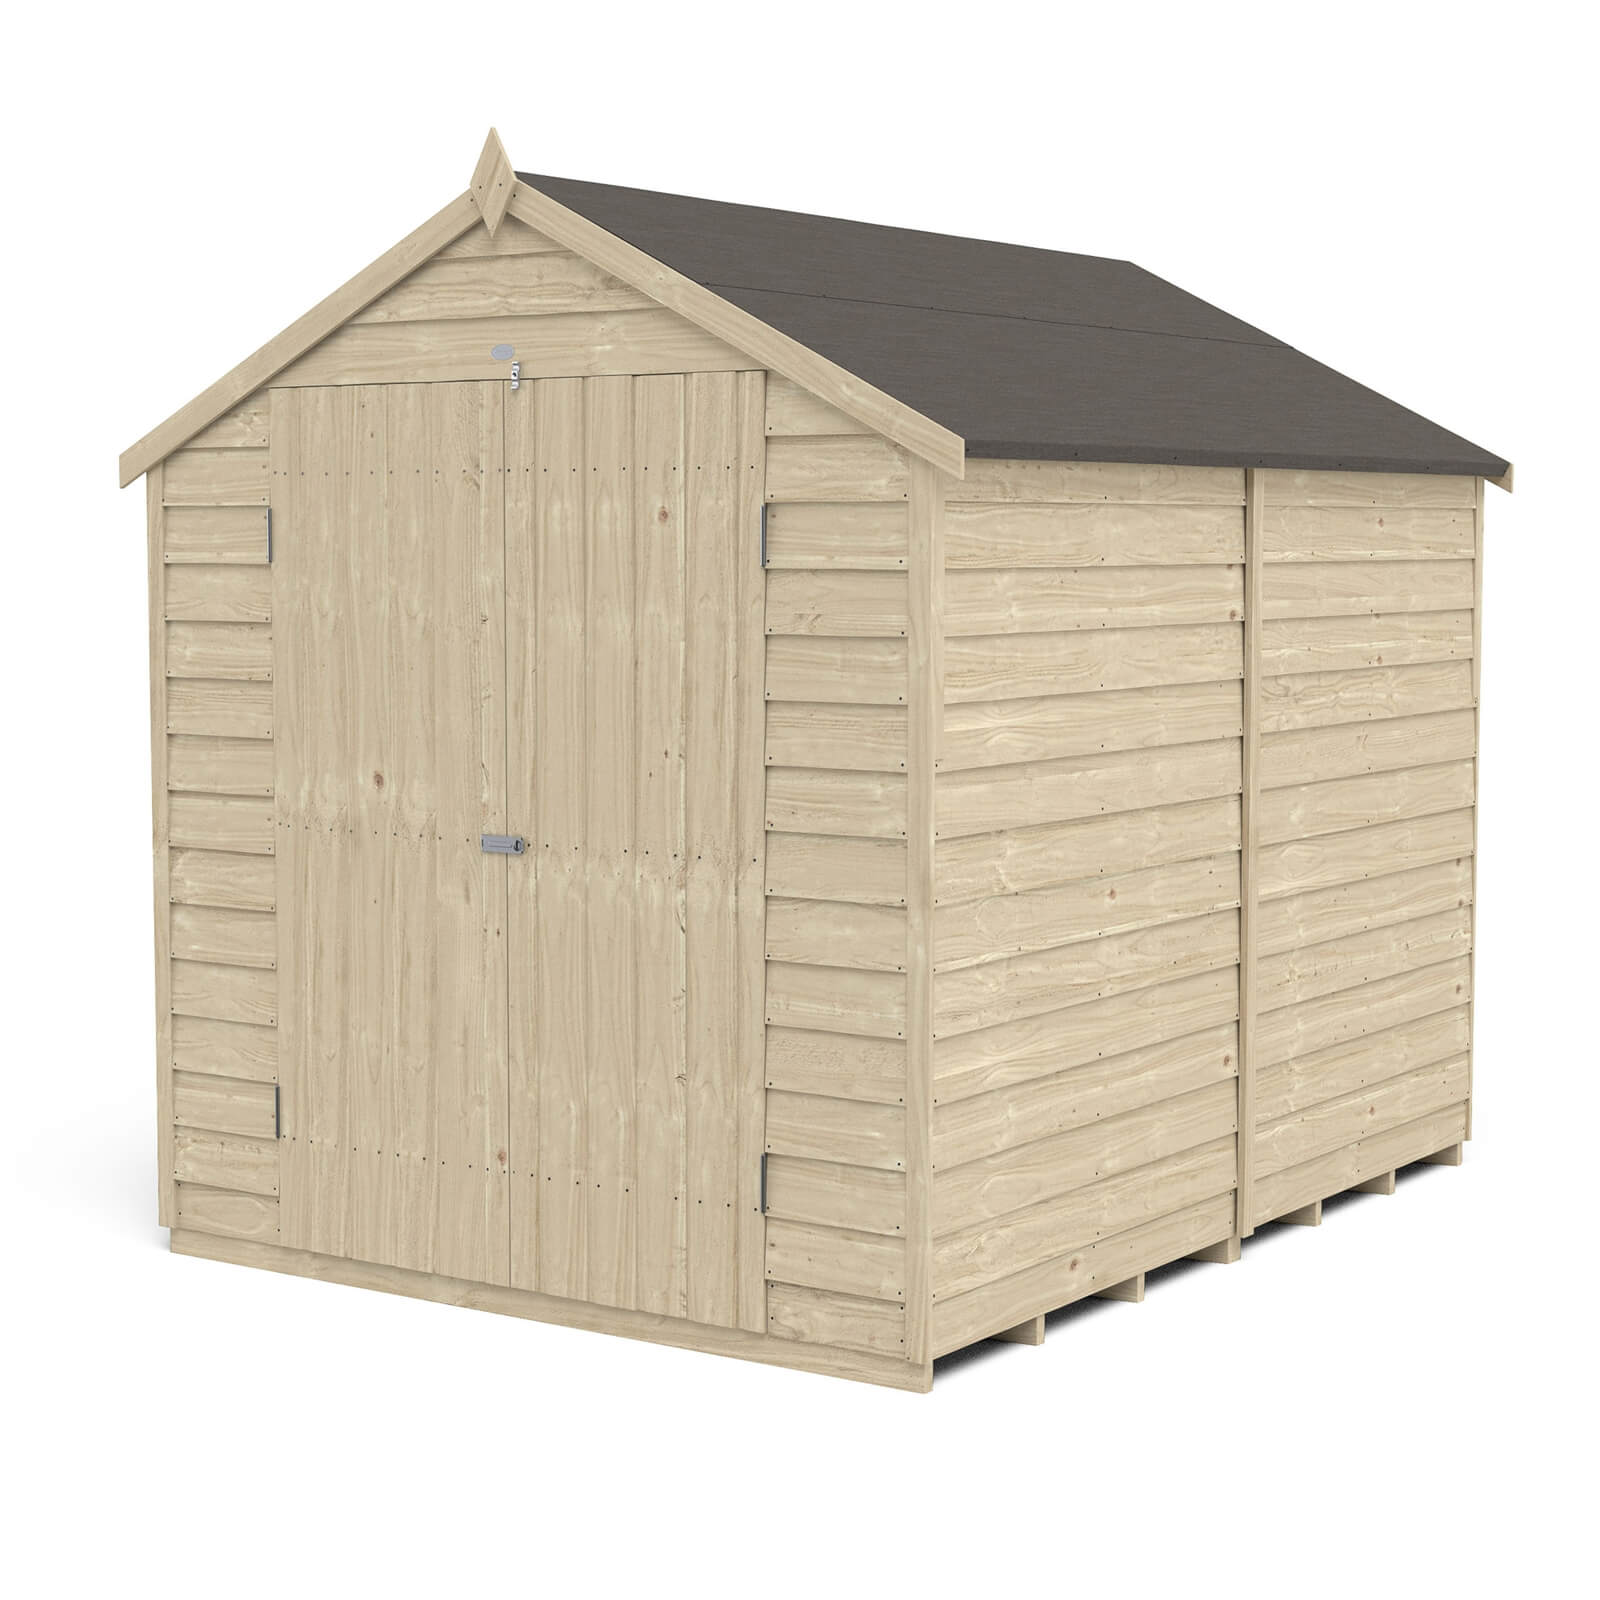 Forest 8 x 6ft Overlap Pressure Treated Apex Shed - Double Door No Windows